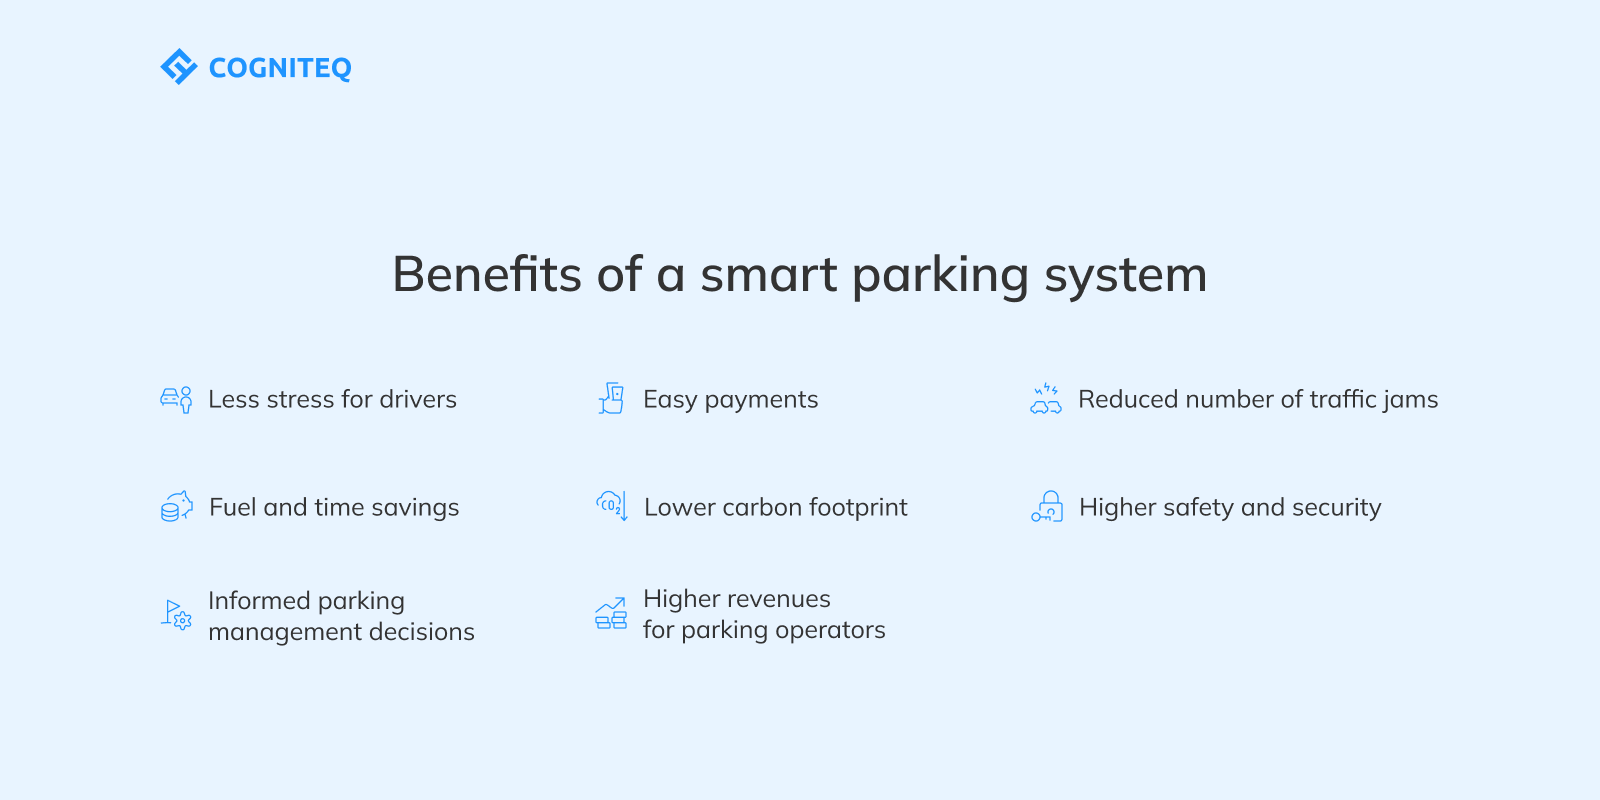 Benefits of a smart parking system